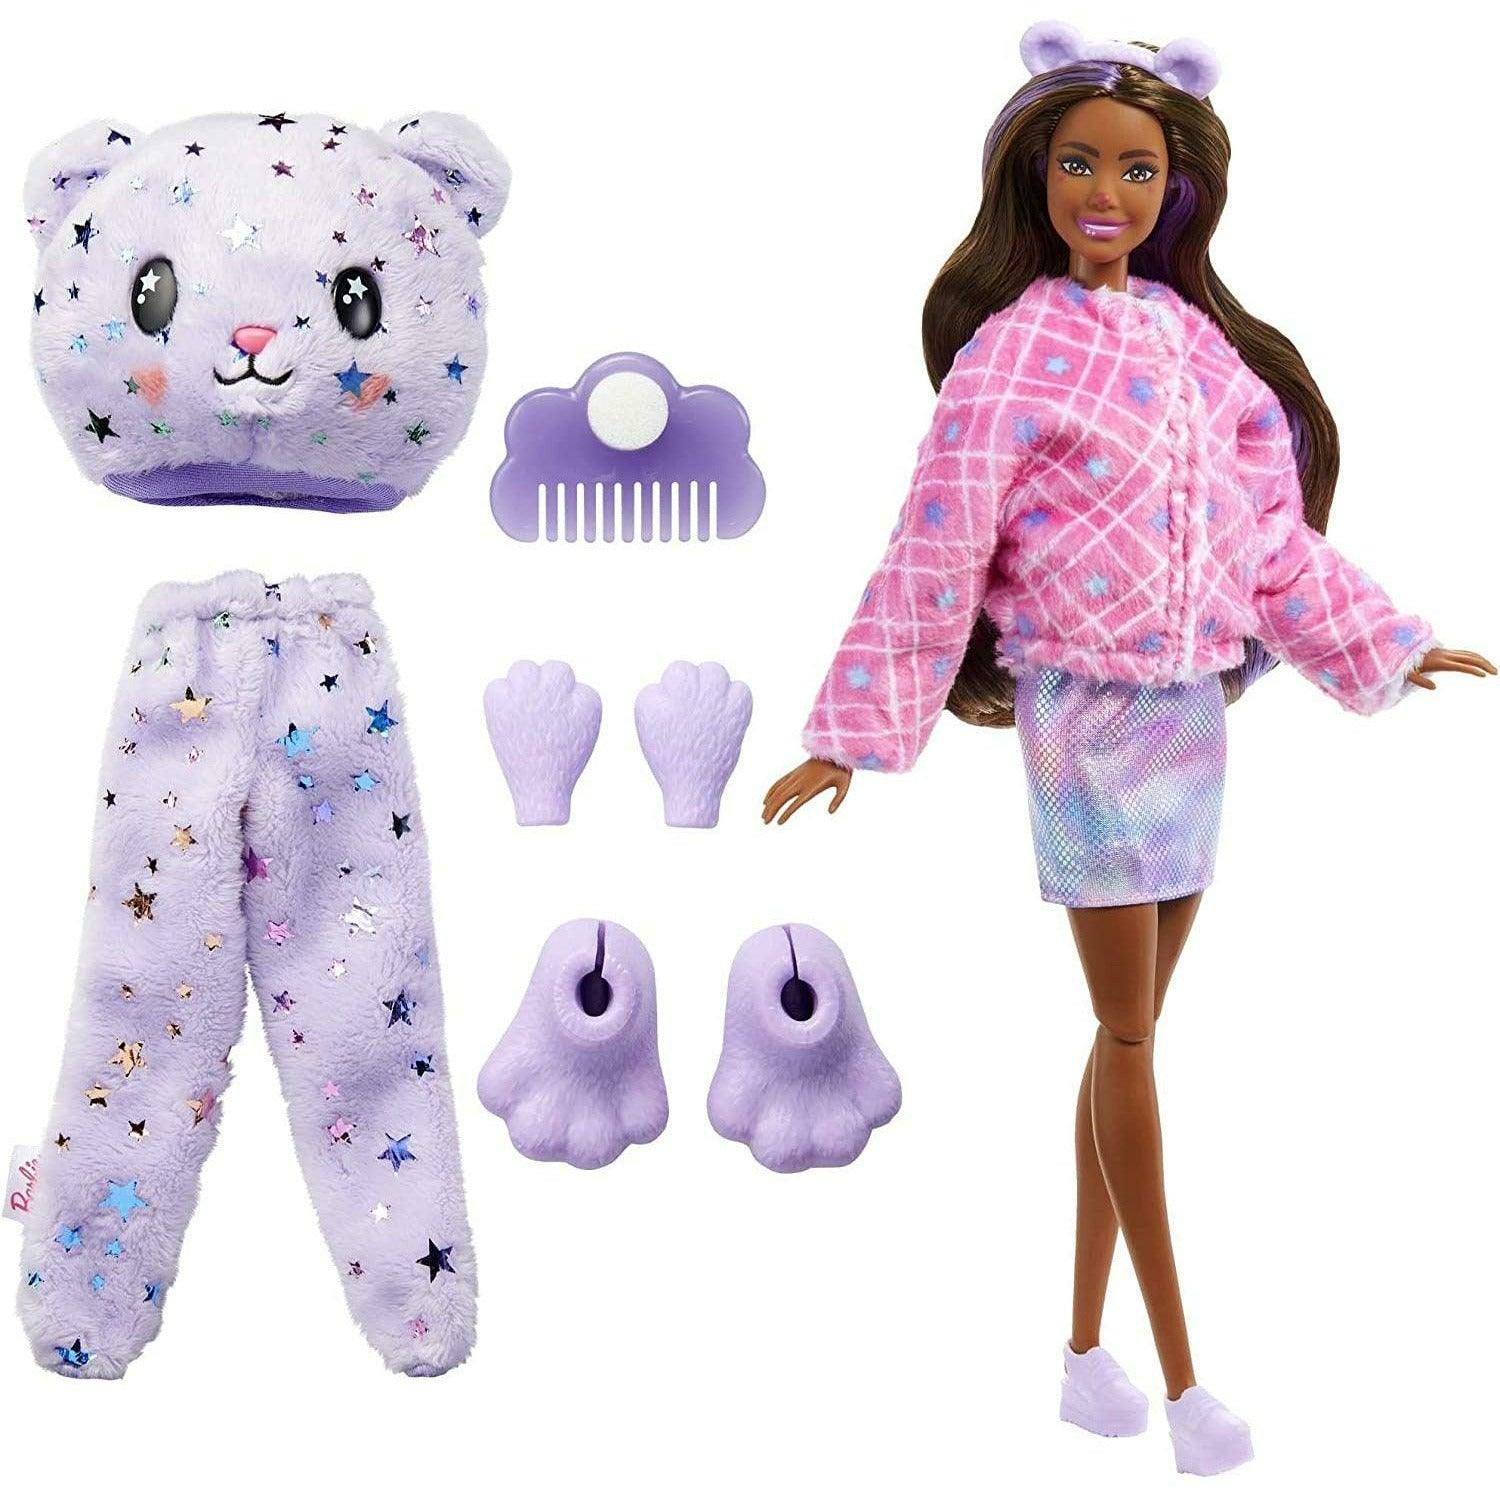 Barbie Cutie Reveal Fantasy Series Doll With Teddy Bear Plush Costume & 10 Surprises Including Mini Pet & Color Change - BumbleToys - 5-7 Years, Barbie, Fashion Dolls & Accessories, Girls, OXE, Pre-Order